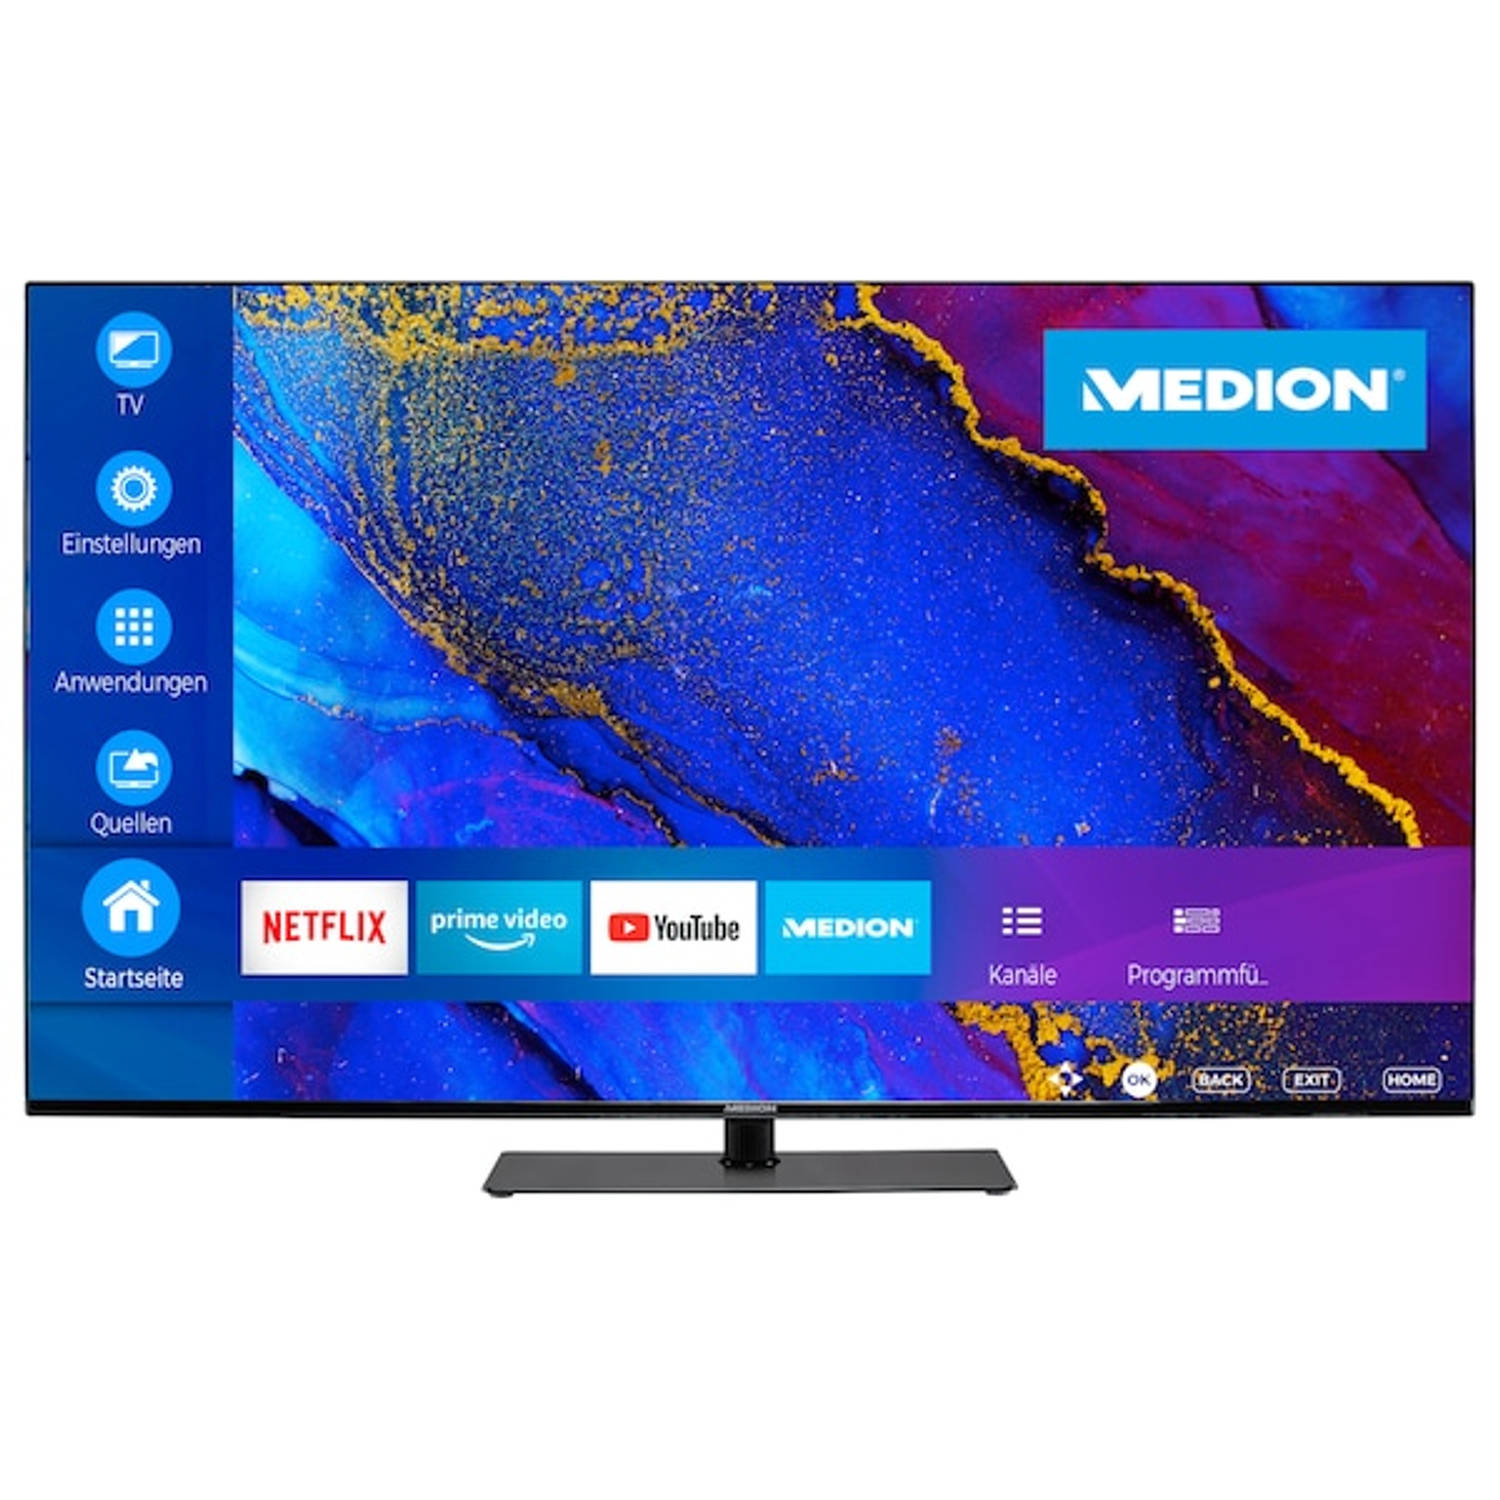 Medion X16519 - Smart TV - 163,9 cm - 65 inch - 4K LCD - HDR - Dolby Vision - Micro Dimming - Netflix - Amazon Prime Video - Bluetooth - Dolby Atmos - CI+ - Zwart